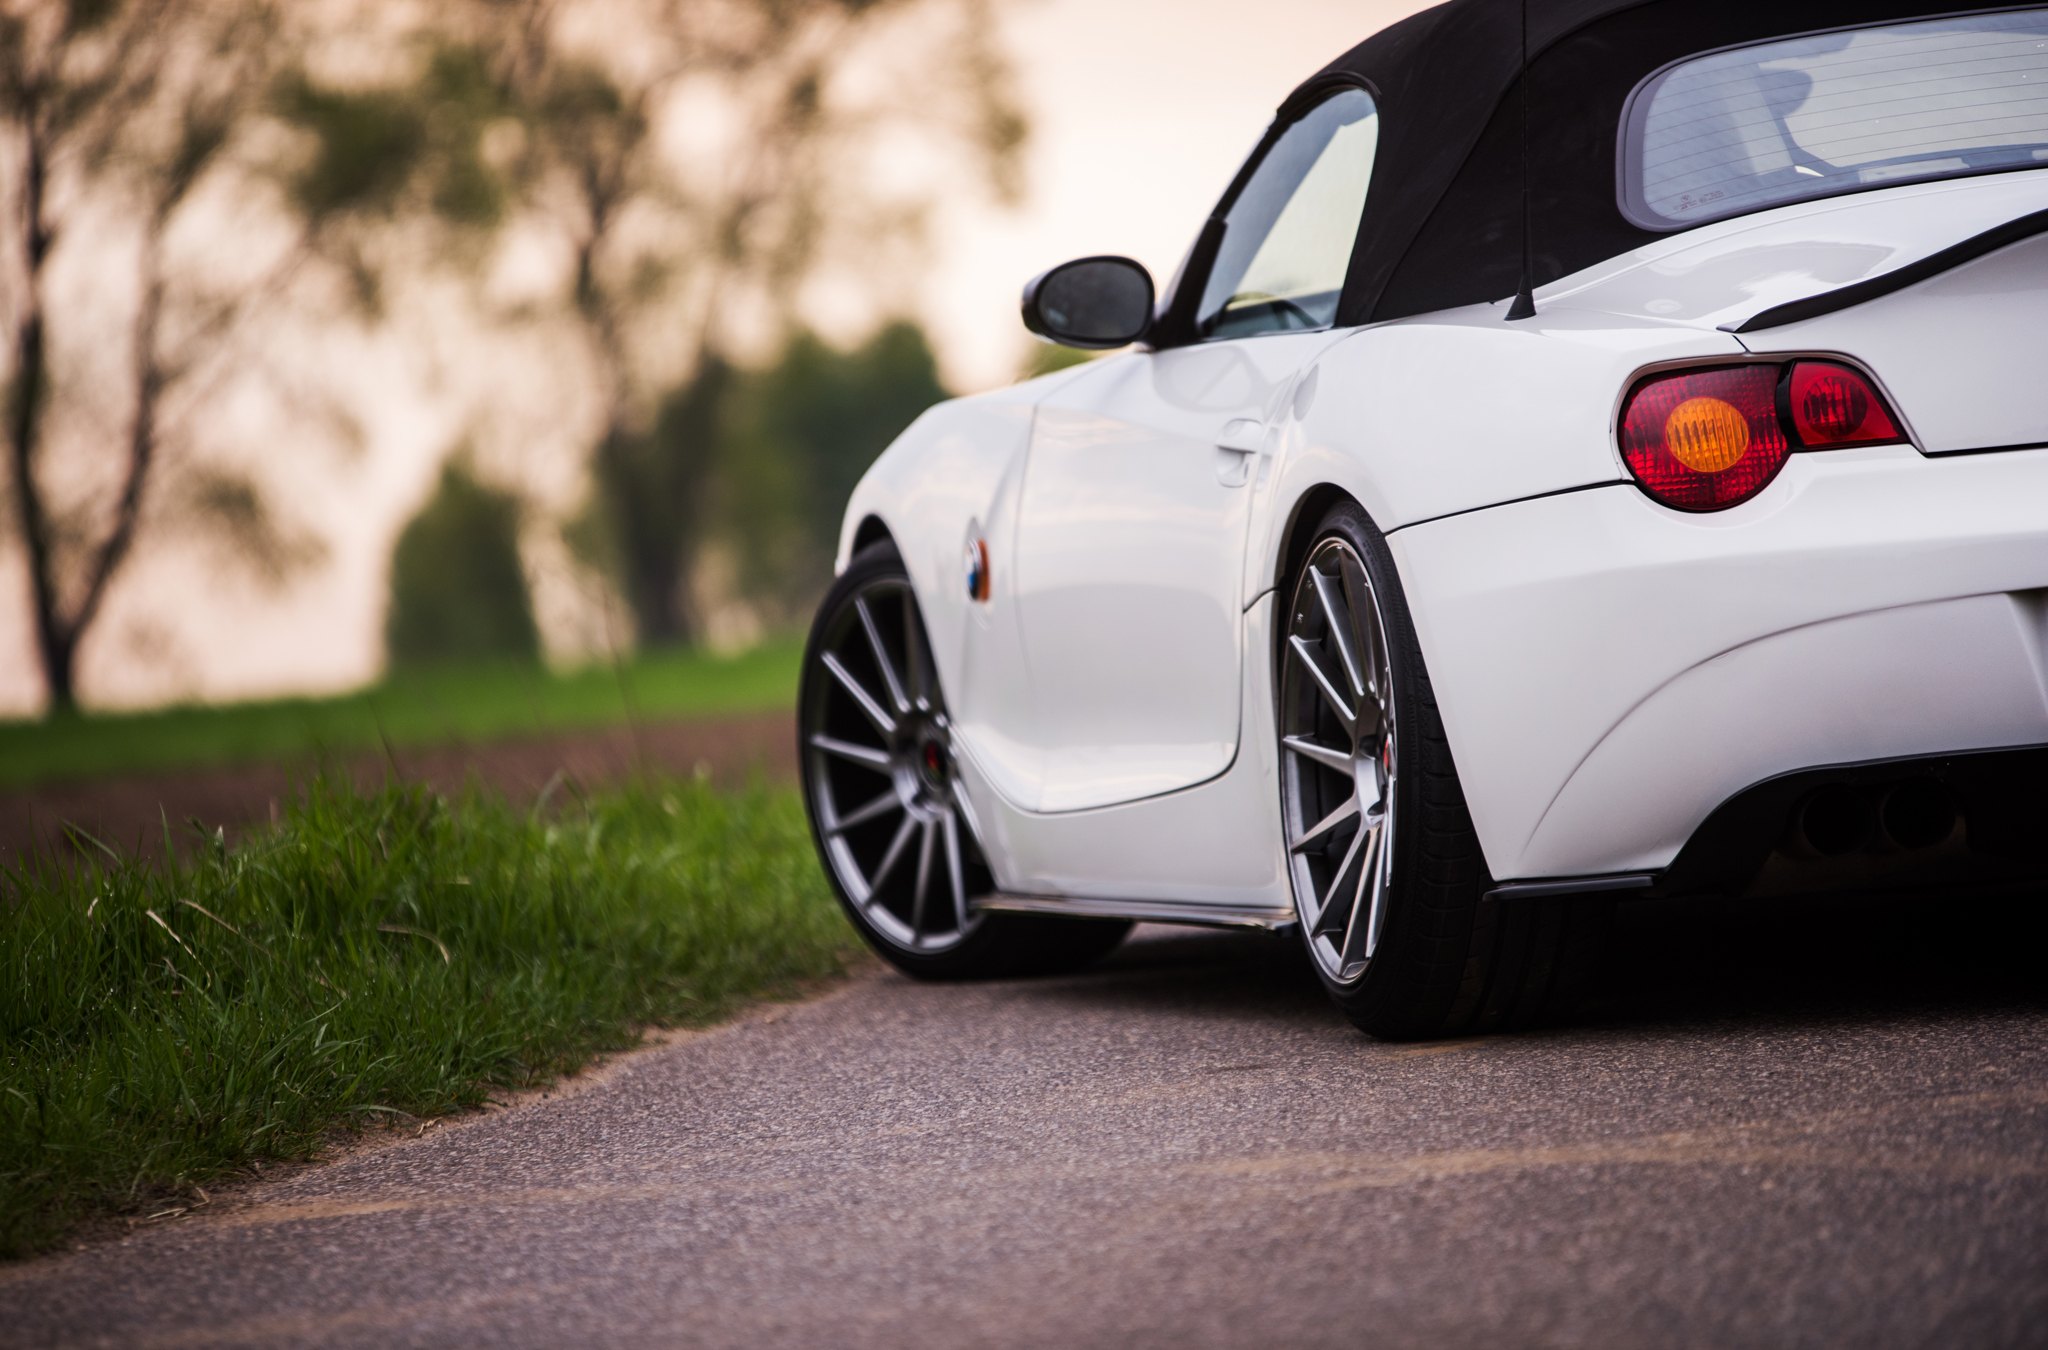 Aftermarket Rear Diffuser on White BMW Z4 - Photo by JR Wheels